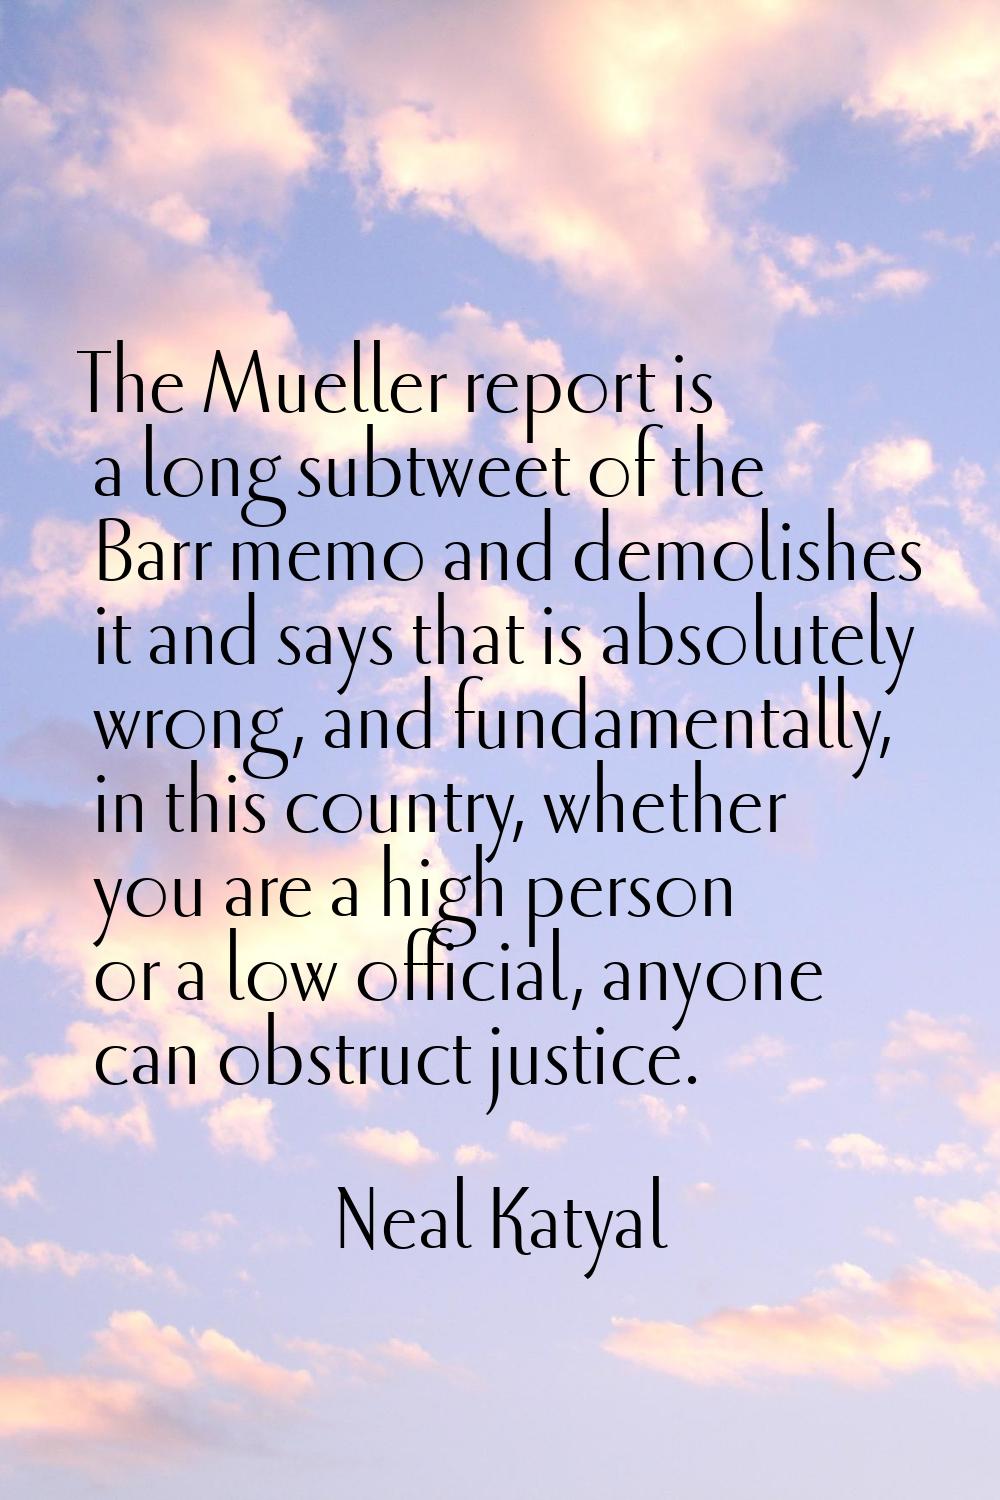 The Mueller report is a long subtweet of the Barr memo and demolishes it and says that is absolutel